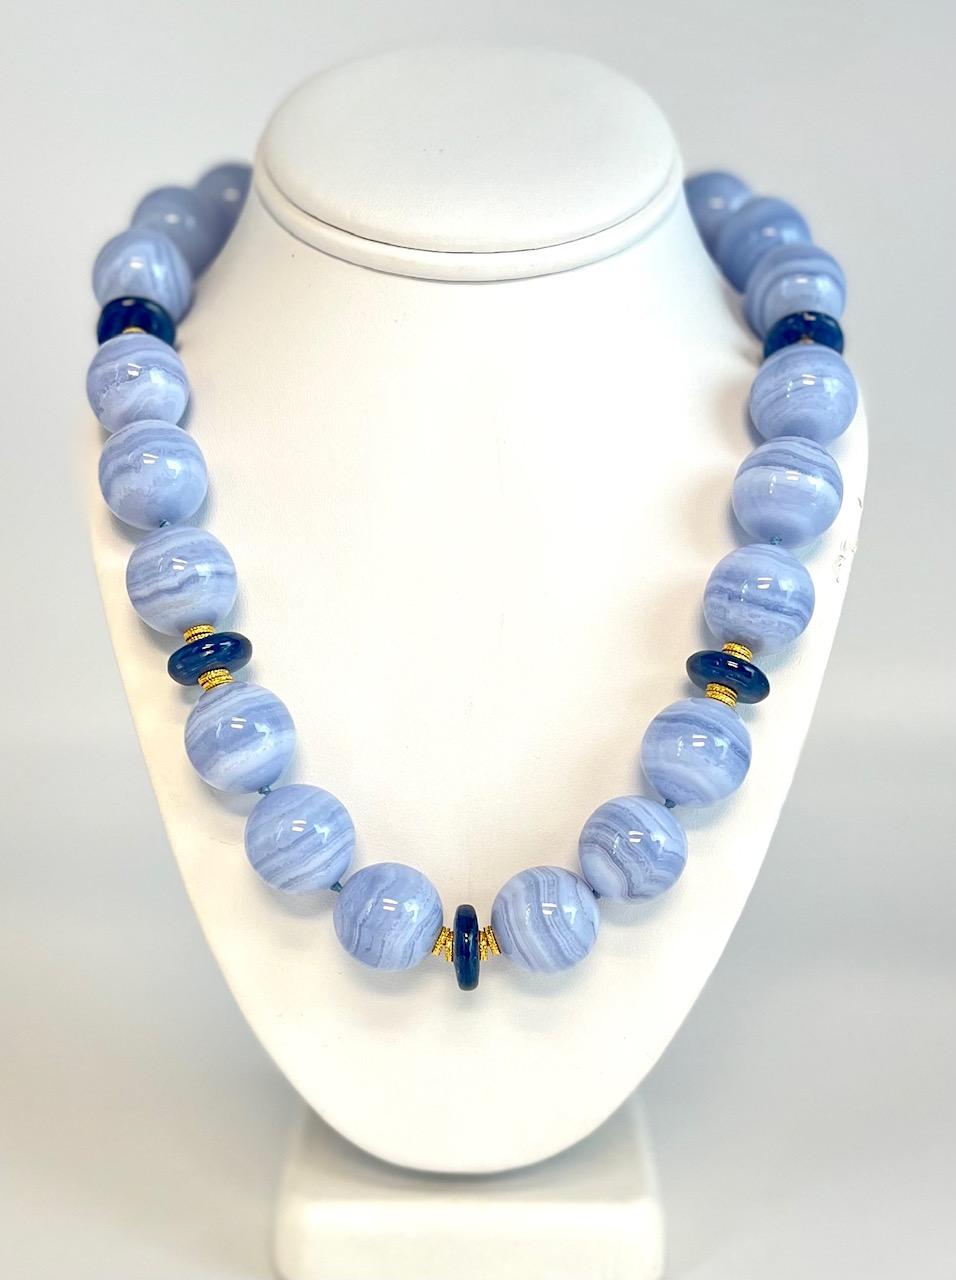 20mm Round Blue Lace Agate and Kyanite Bead Necklace with Yellow Gold Accents For Sale 2